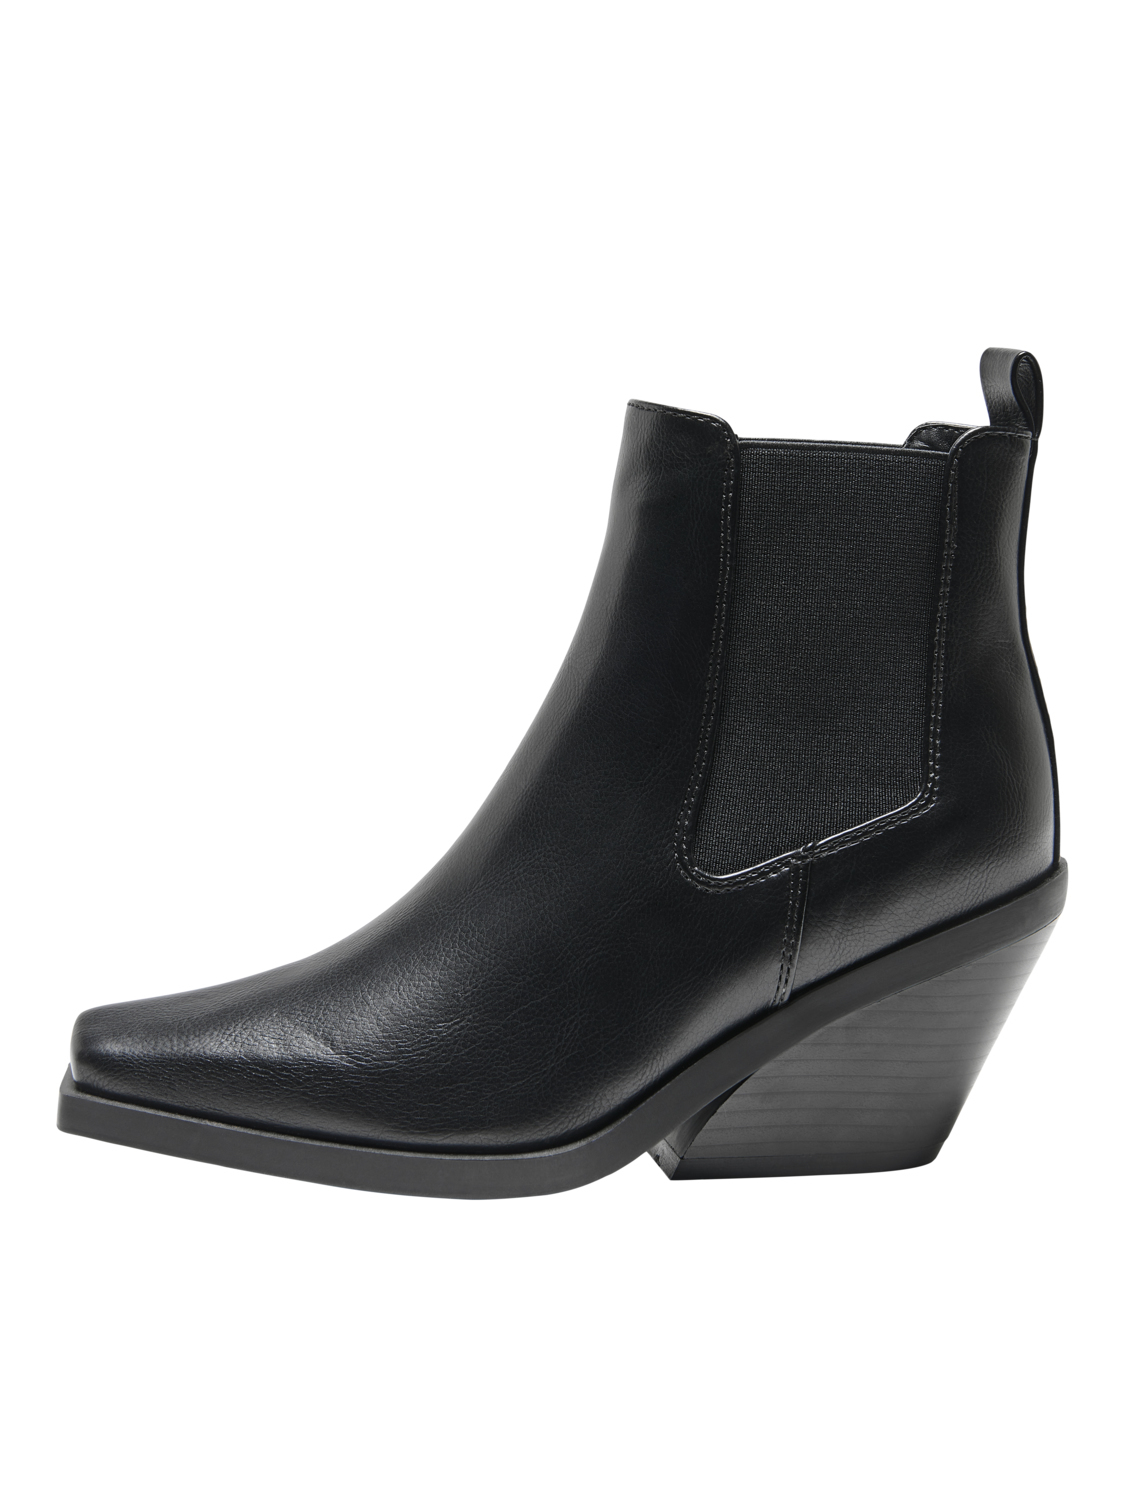 FINAL SALE- Bunny heeled ankle boots, BLACK, large